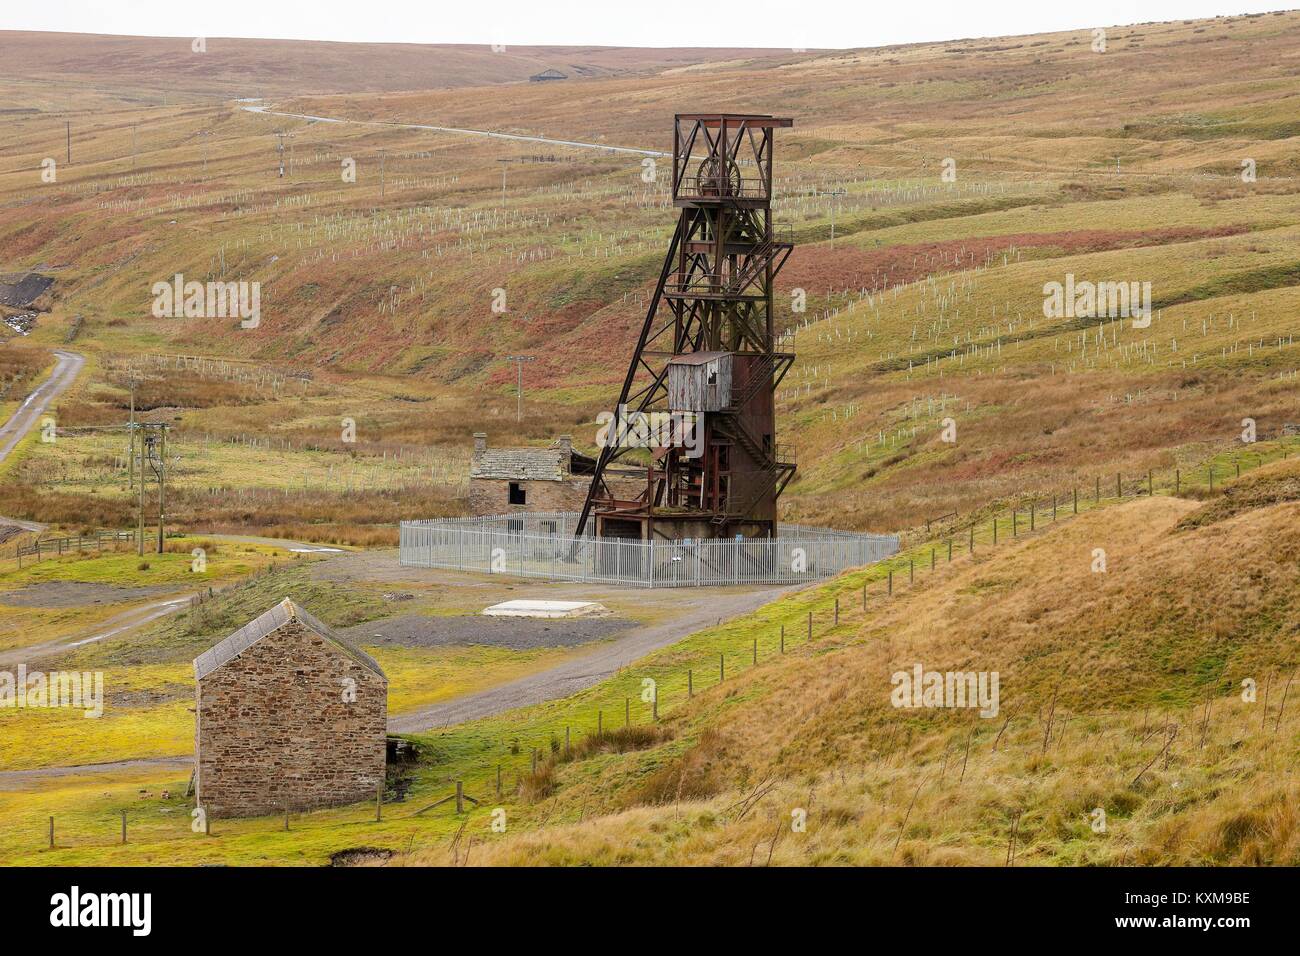 Disused Pithead of Grove Rake Mine buildings, Rookhope District, Weardale, North Pennines, County Durham, England, United Kingdom, Europe. Stock Photo